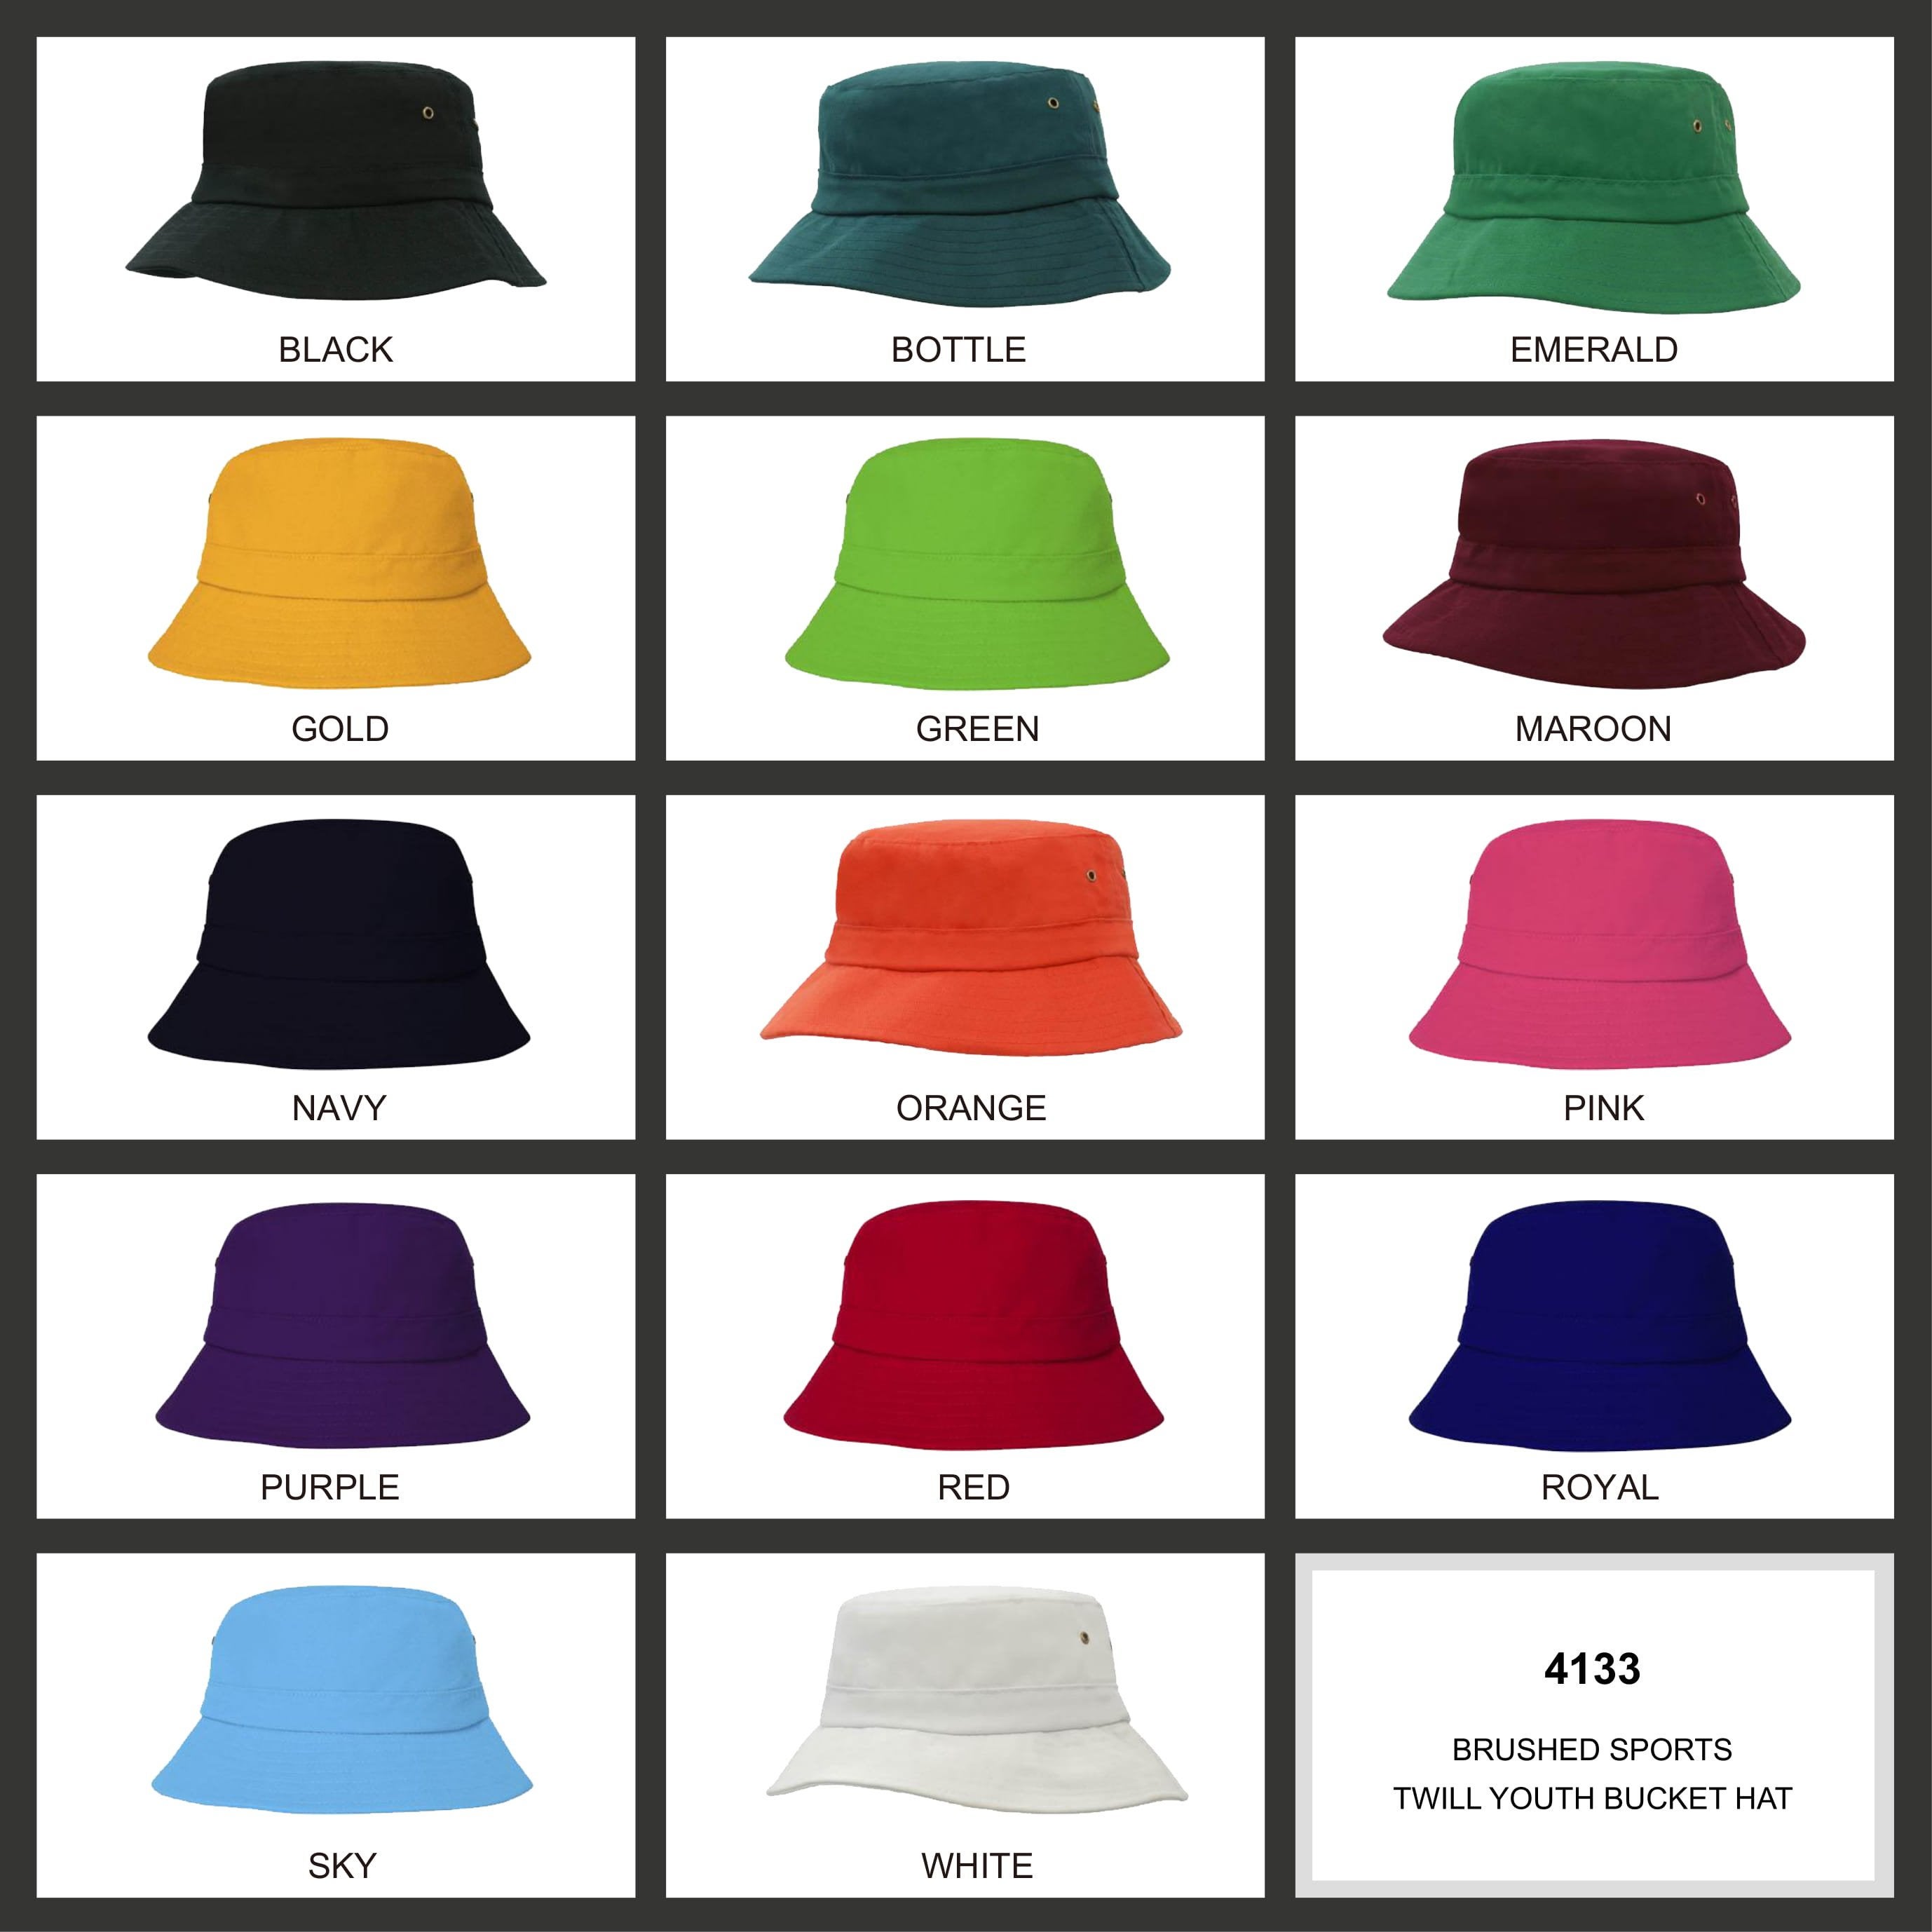 Brushed Sports Twill Youth Bucket Hat